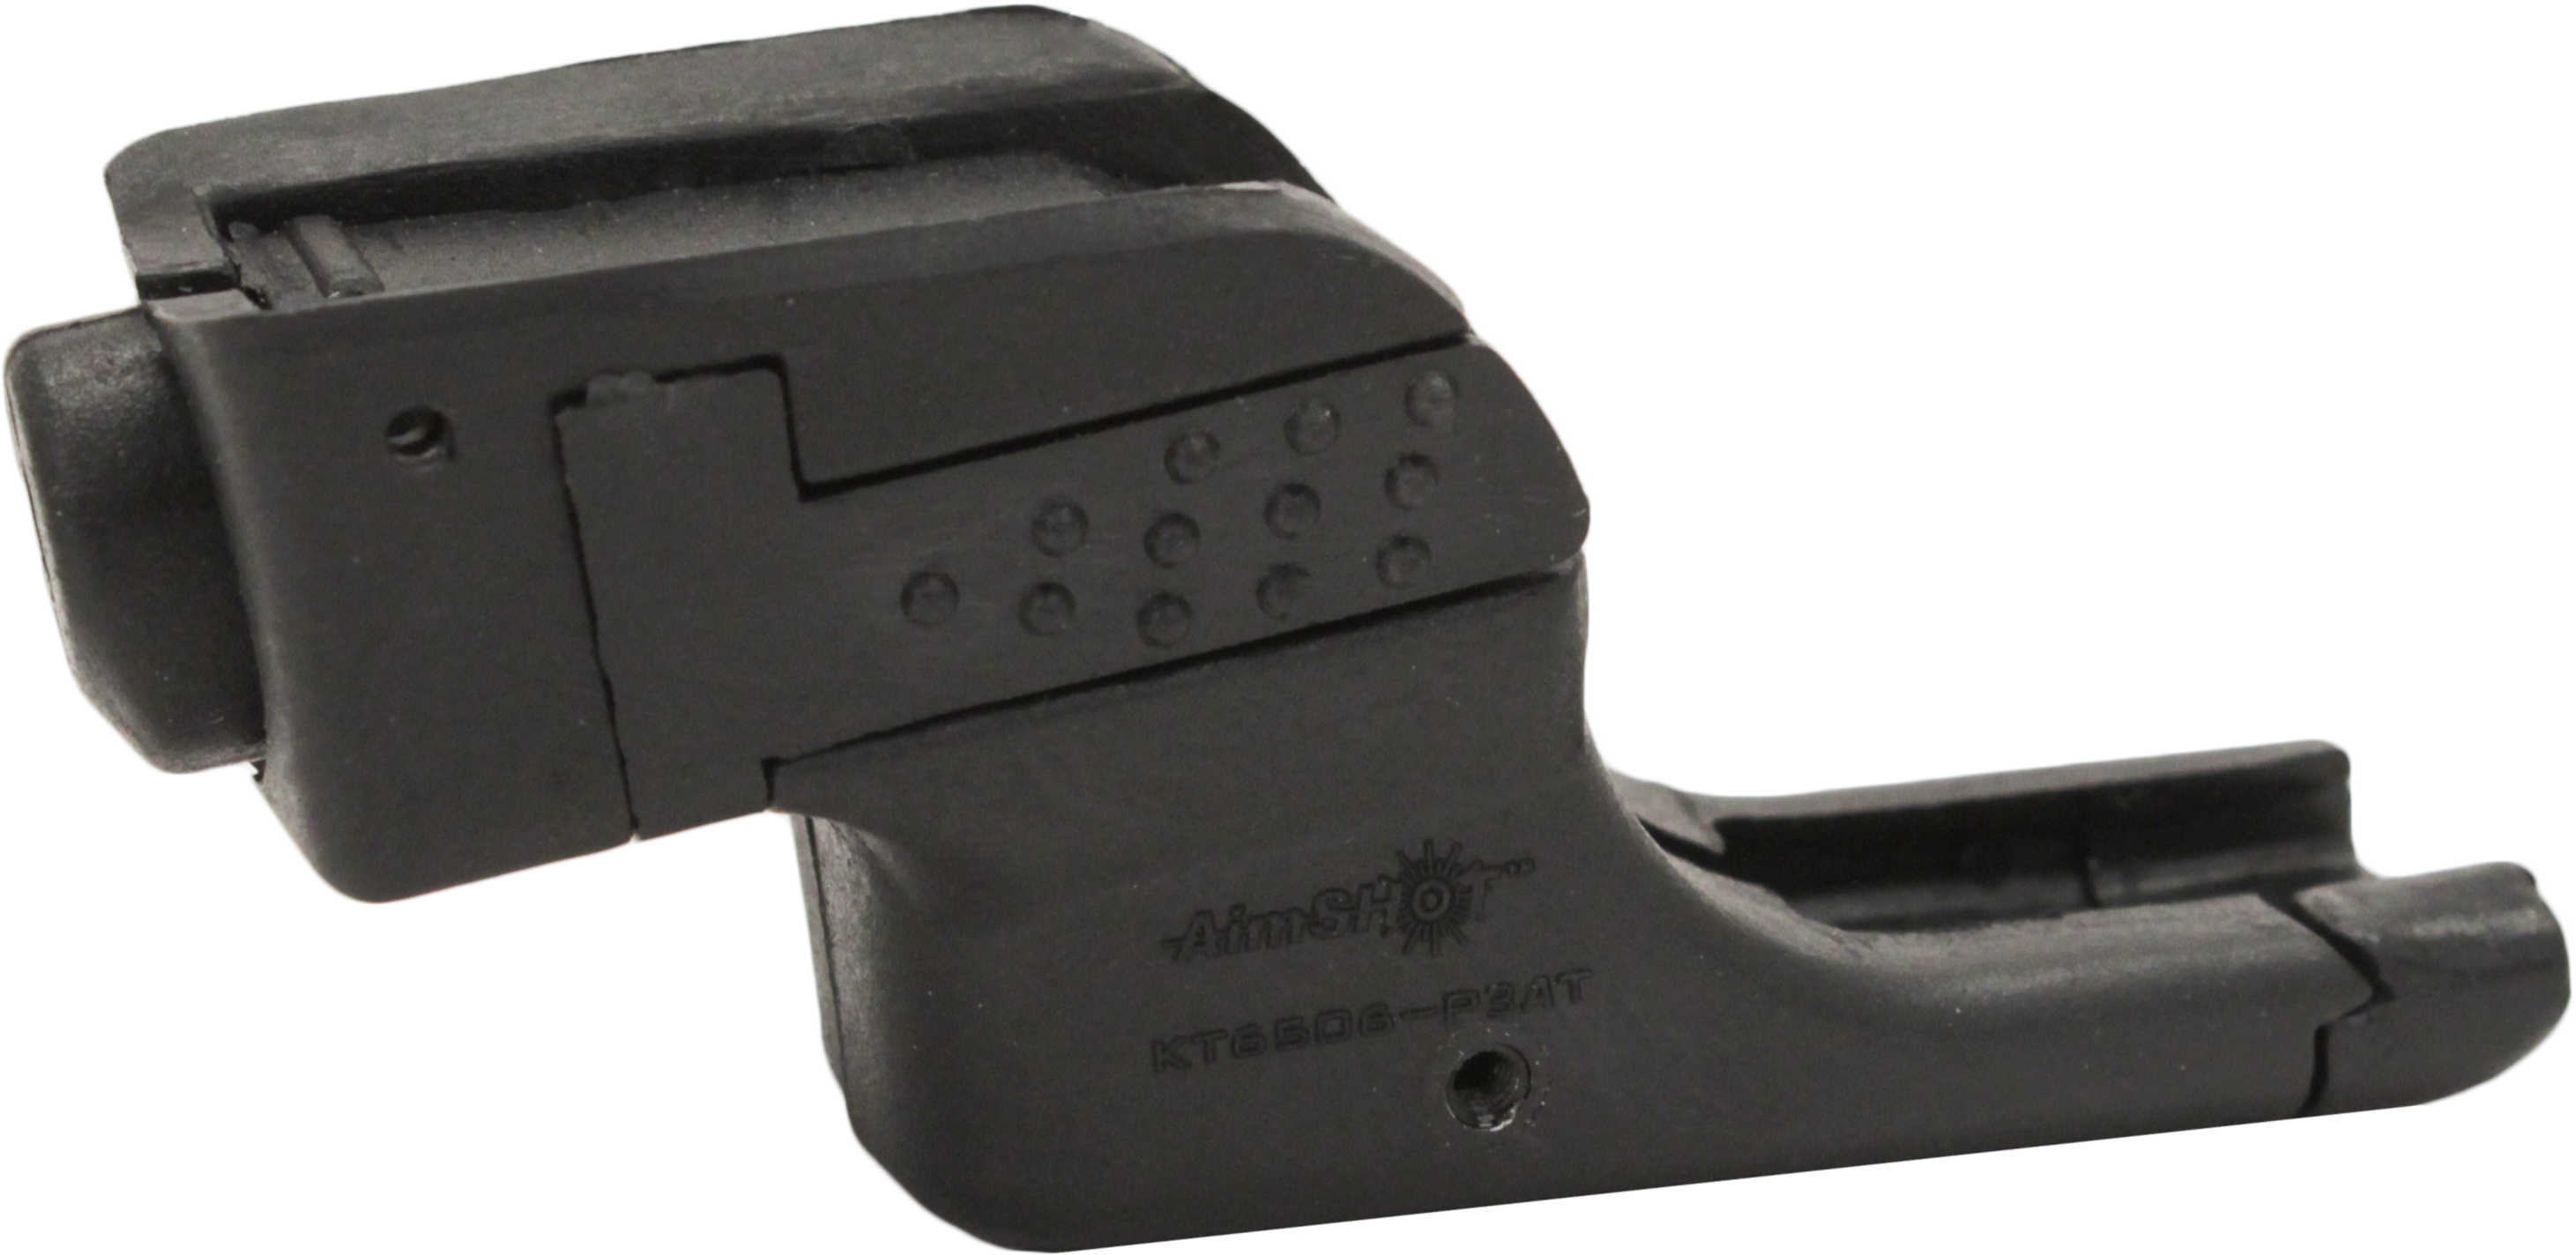 Aimshot Kt6506-P3AT Red Laser Sight For KelTec P3AT/P32